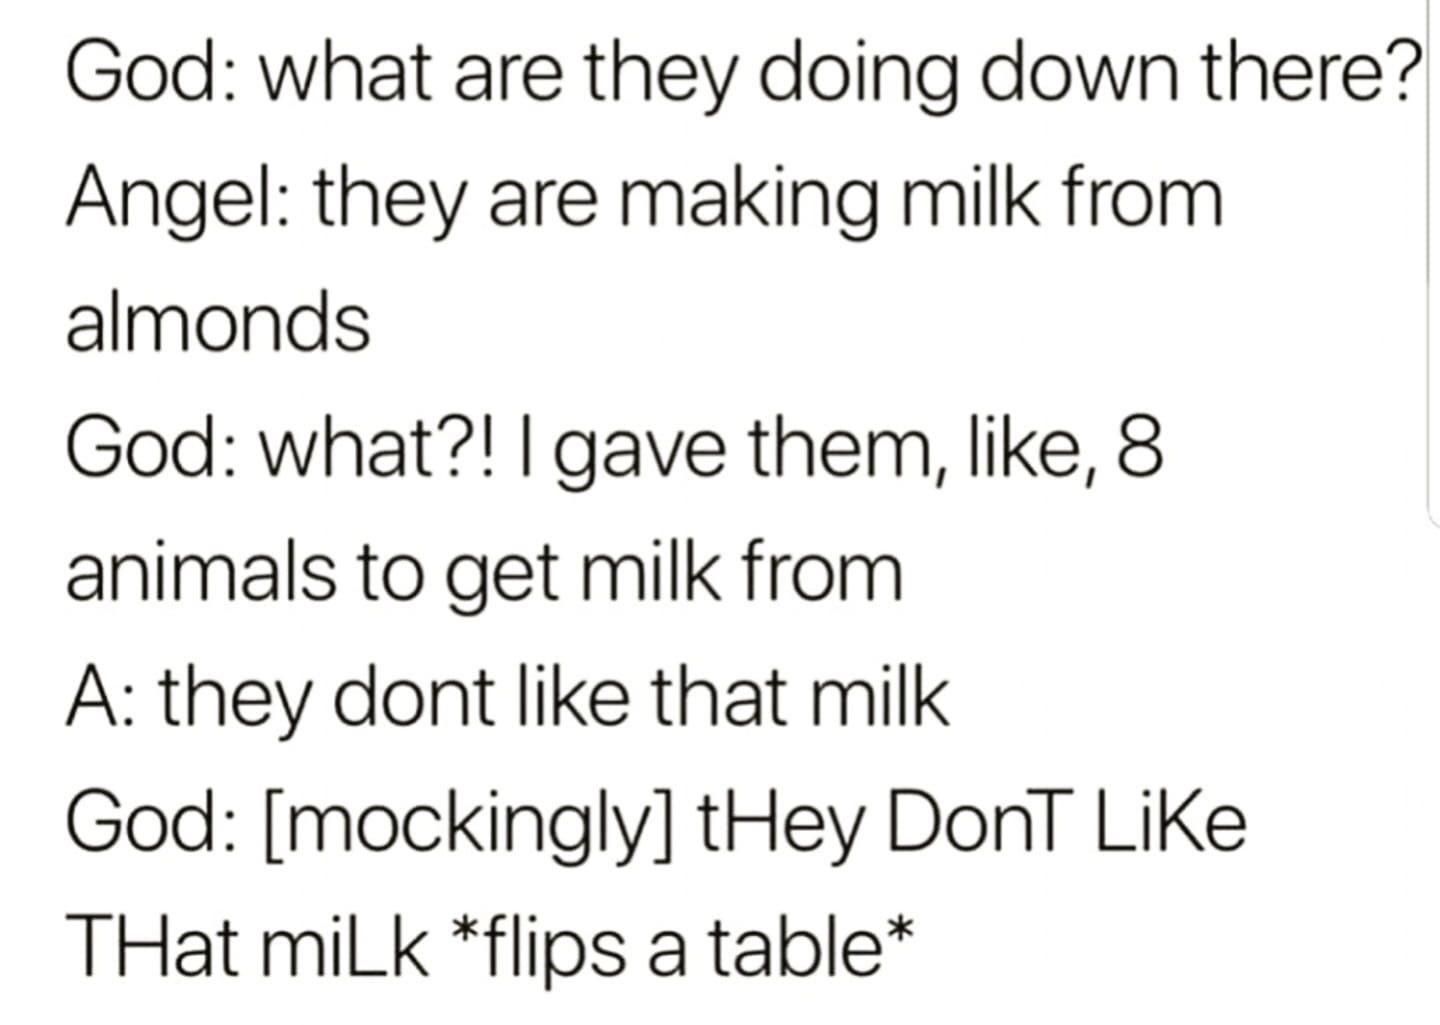 They don’t like that milk